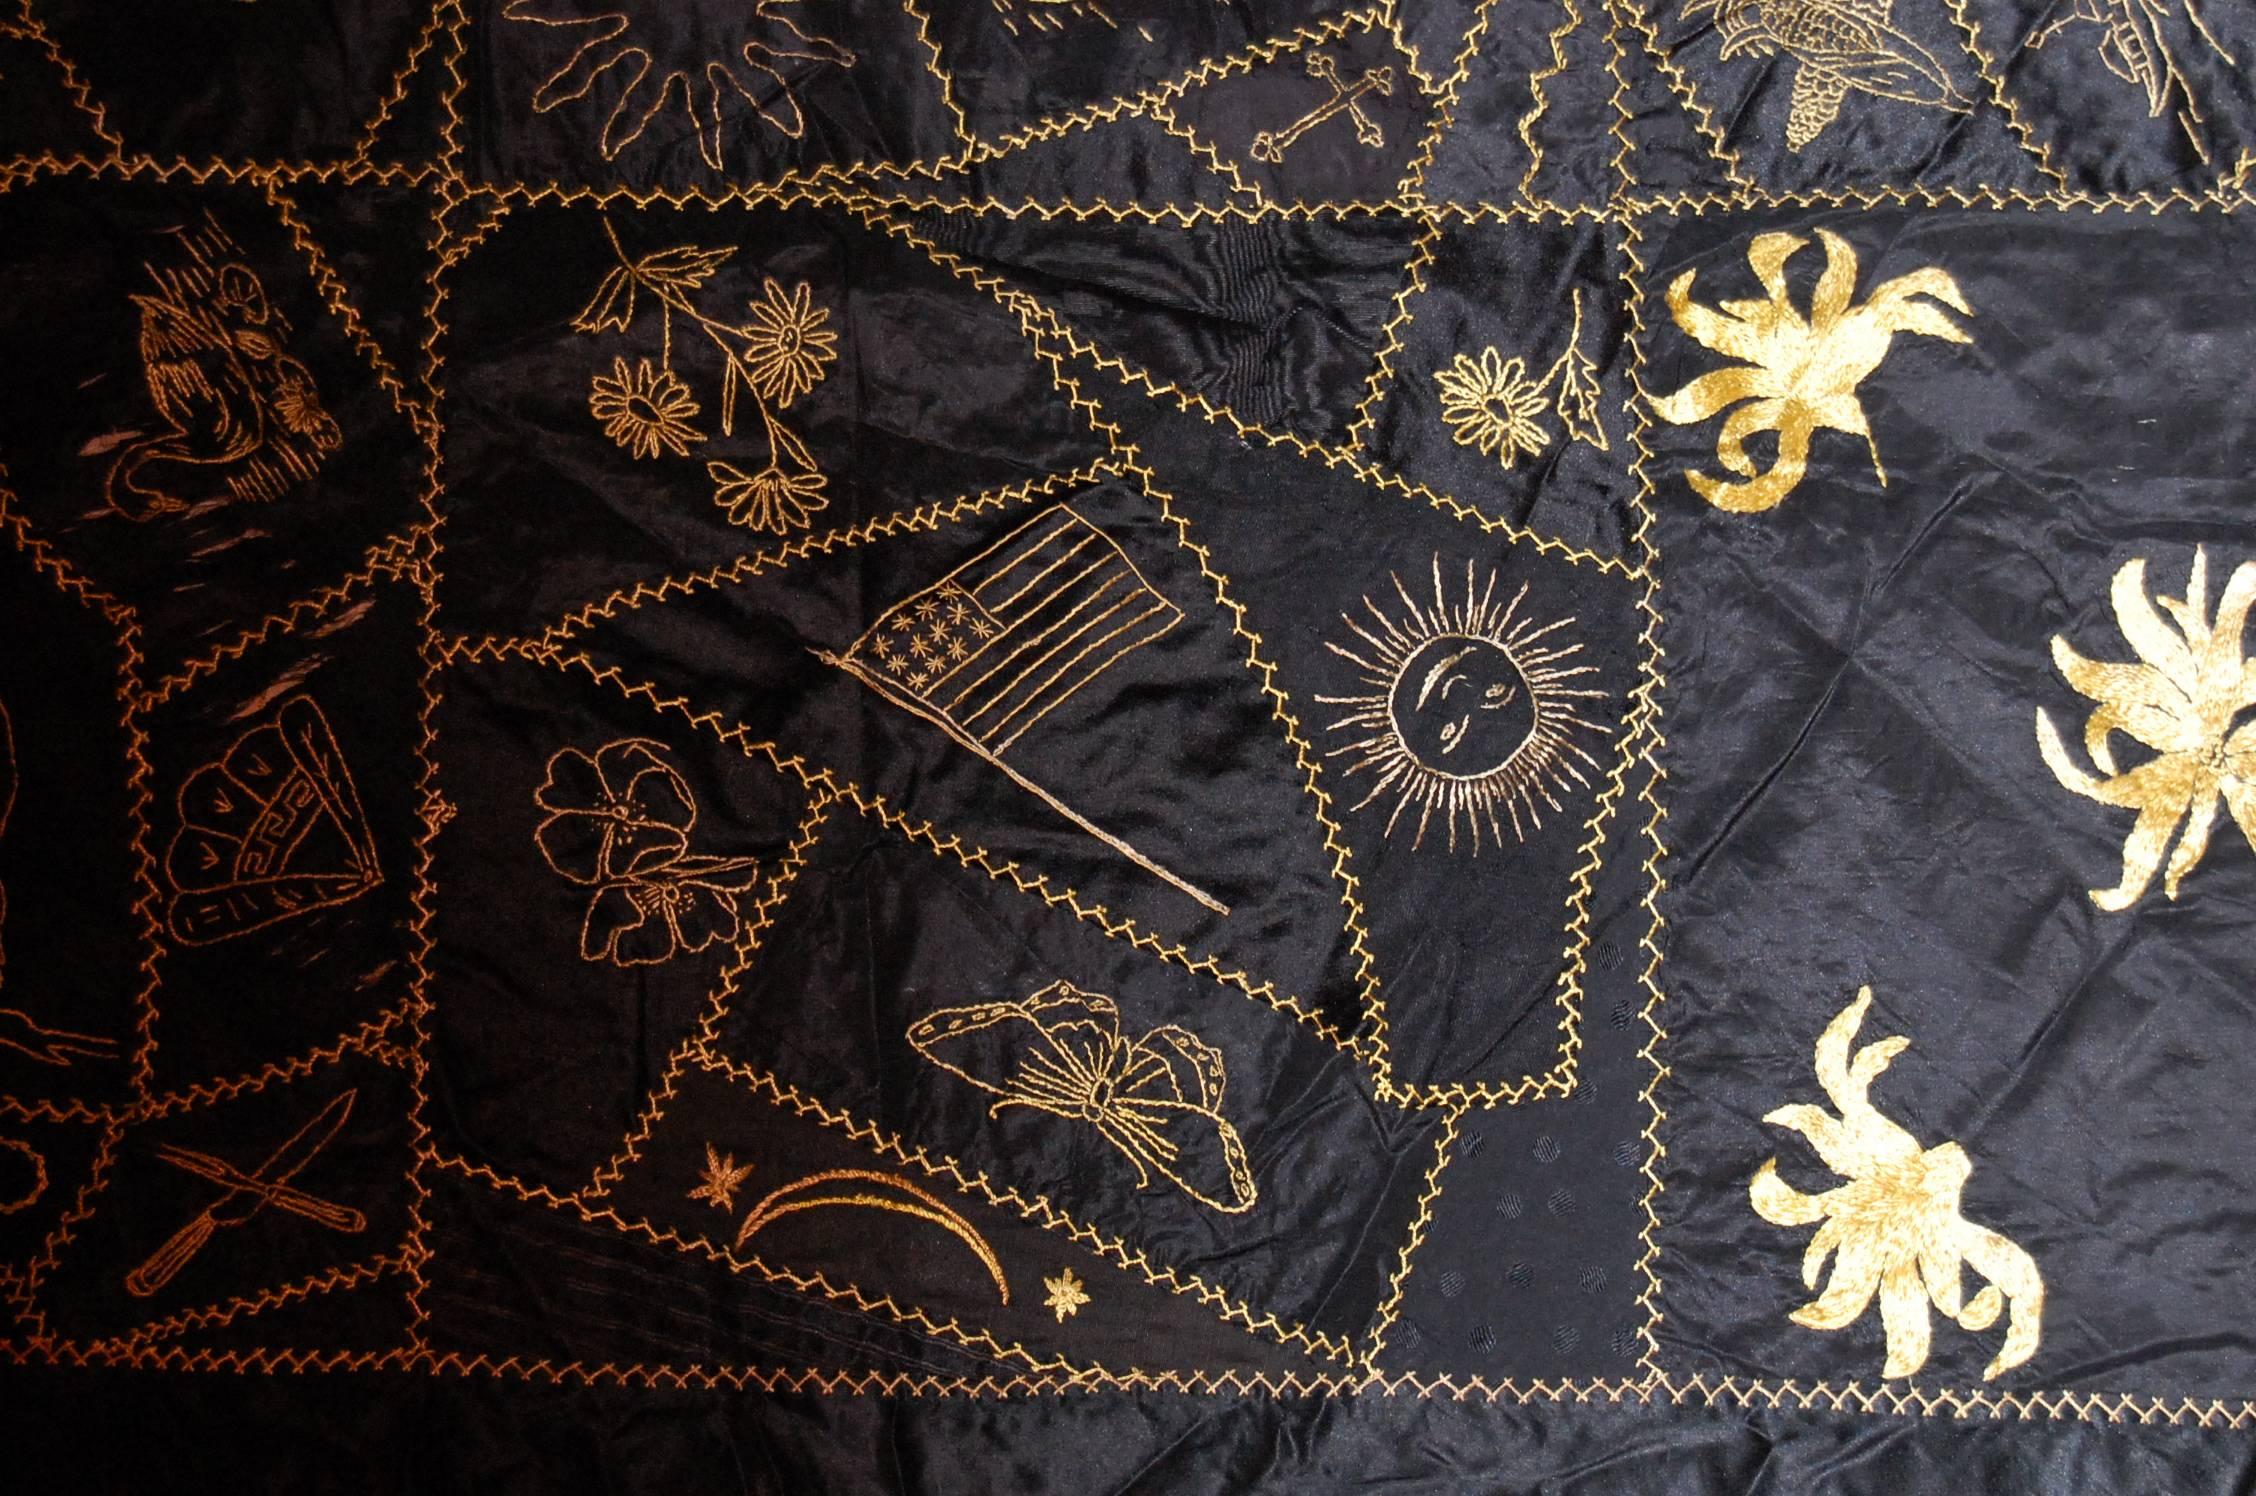 New England Silk Quilt with Gold Embroidery in Excellent Condition, 1901, Boston 2